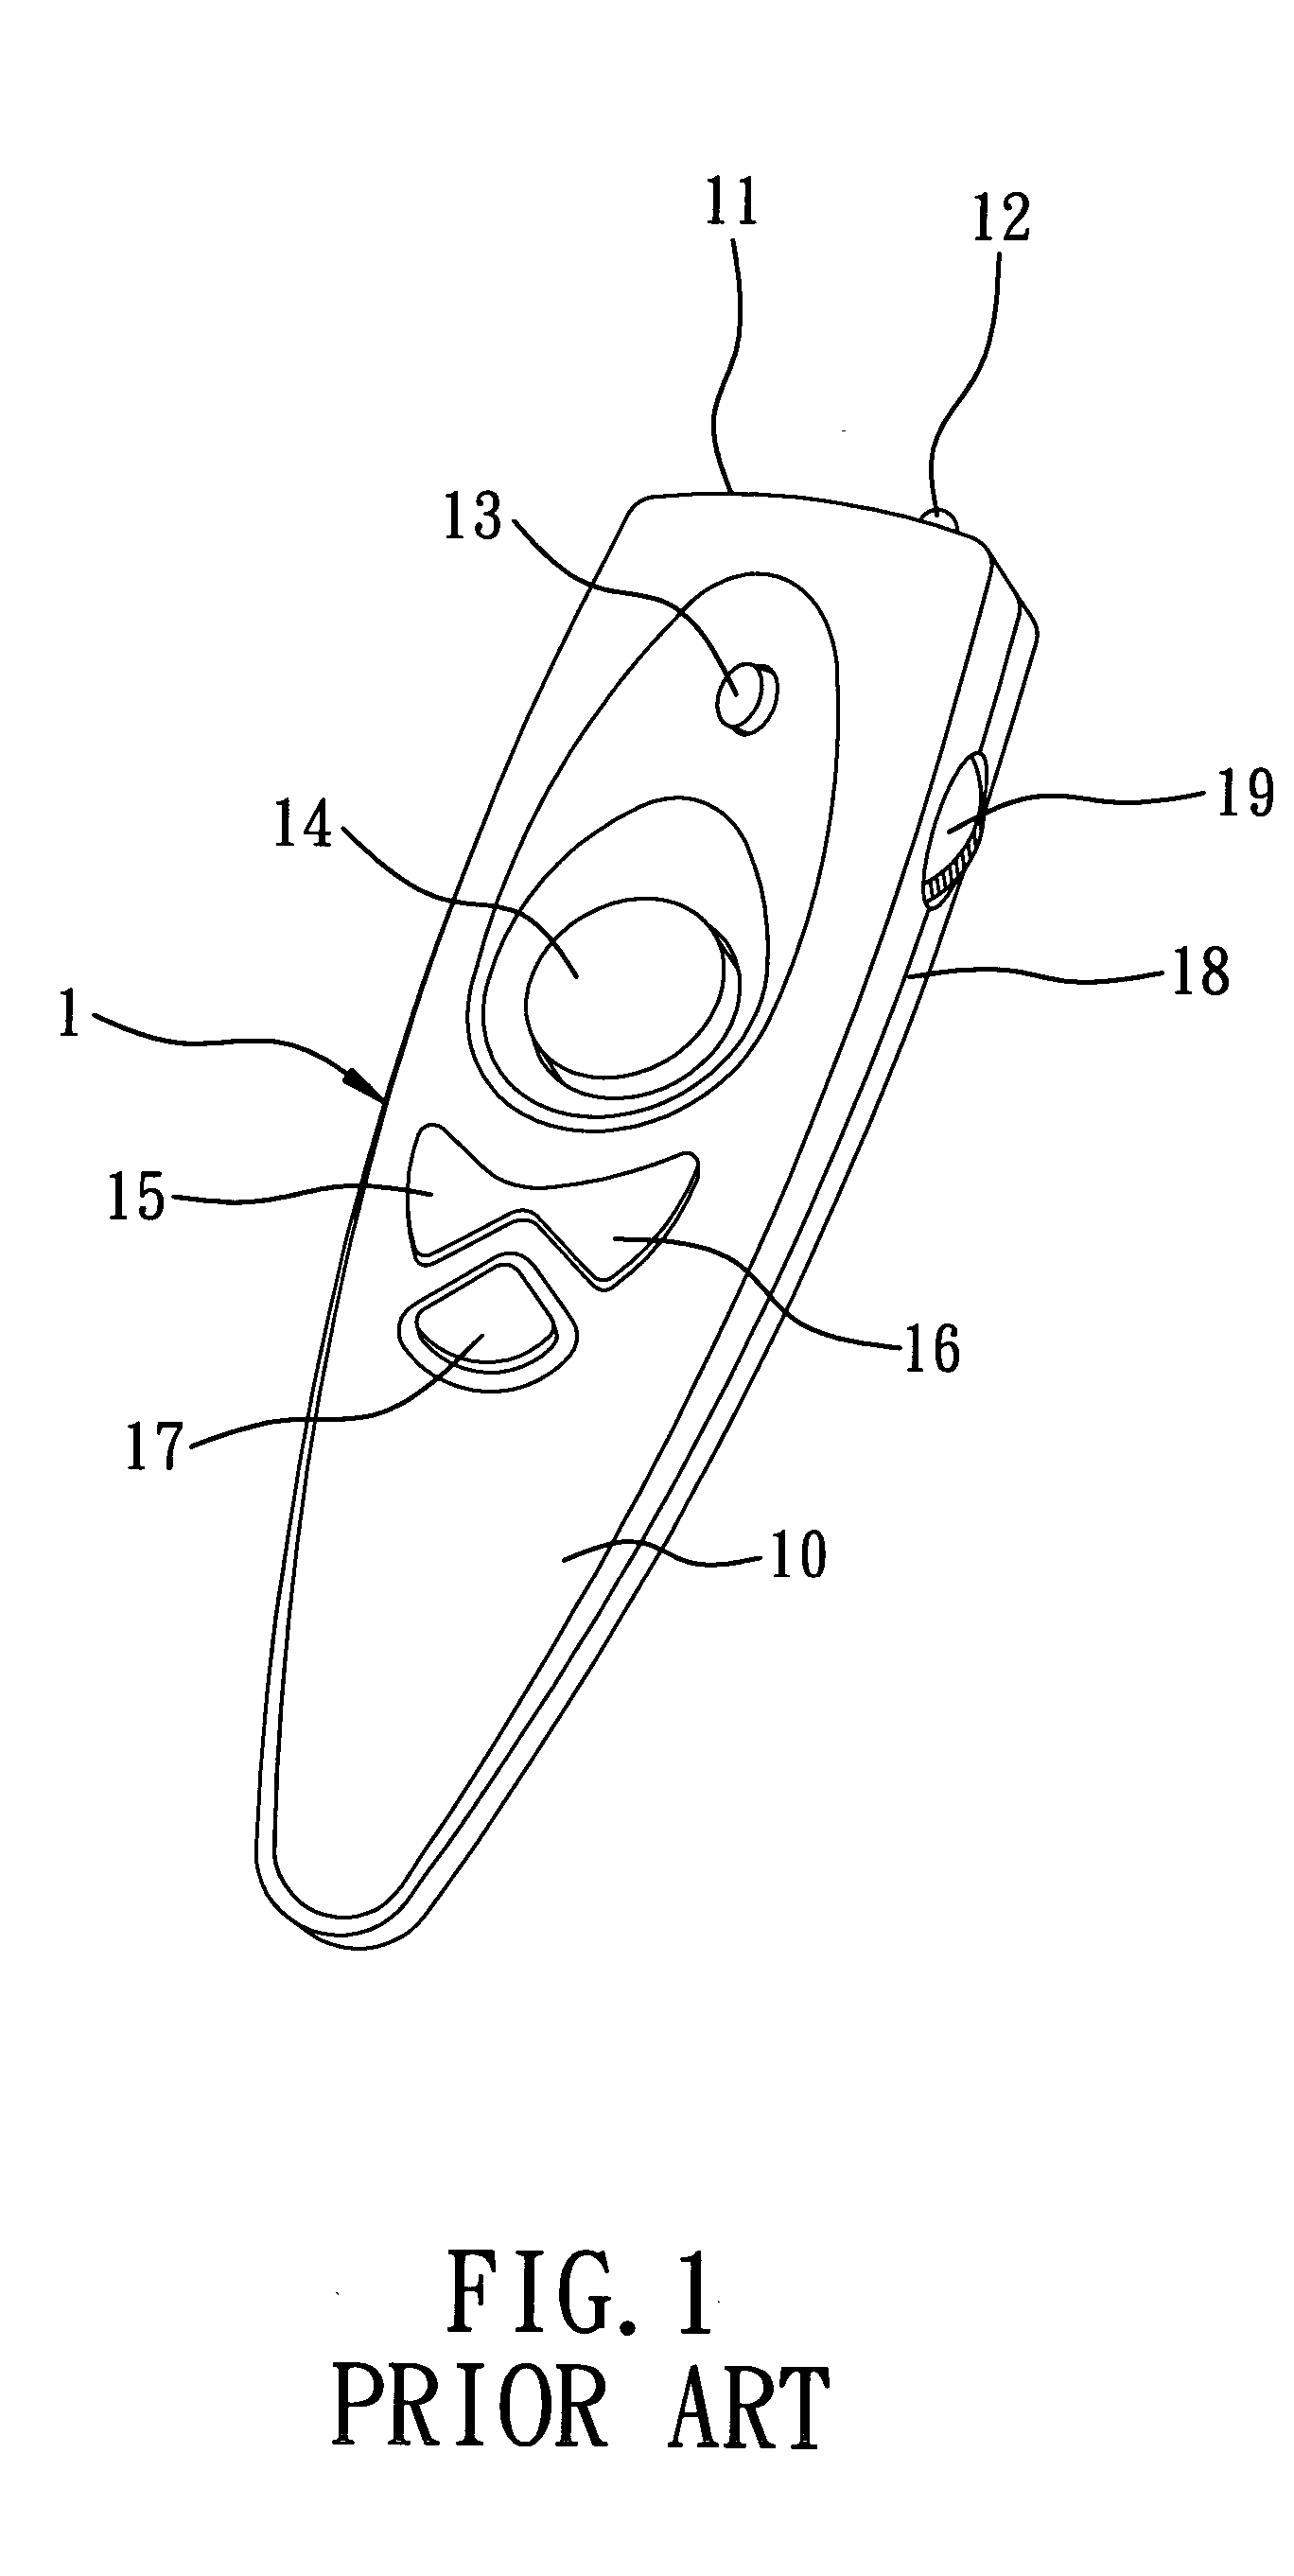 Handheld remote instruction device for a computer-based visual presentation system